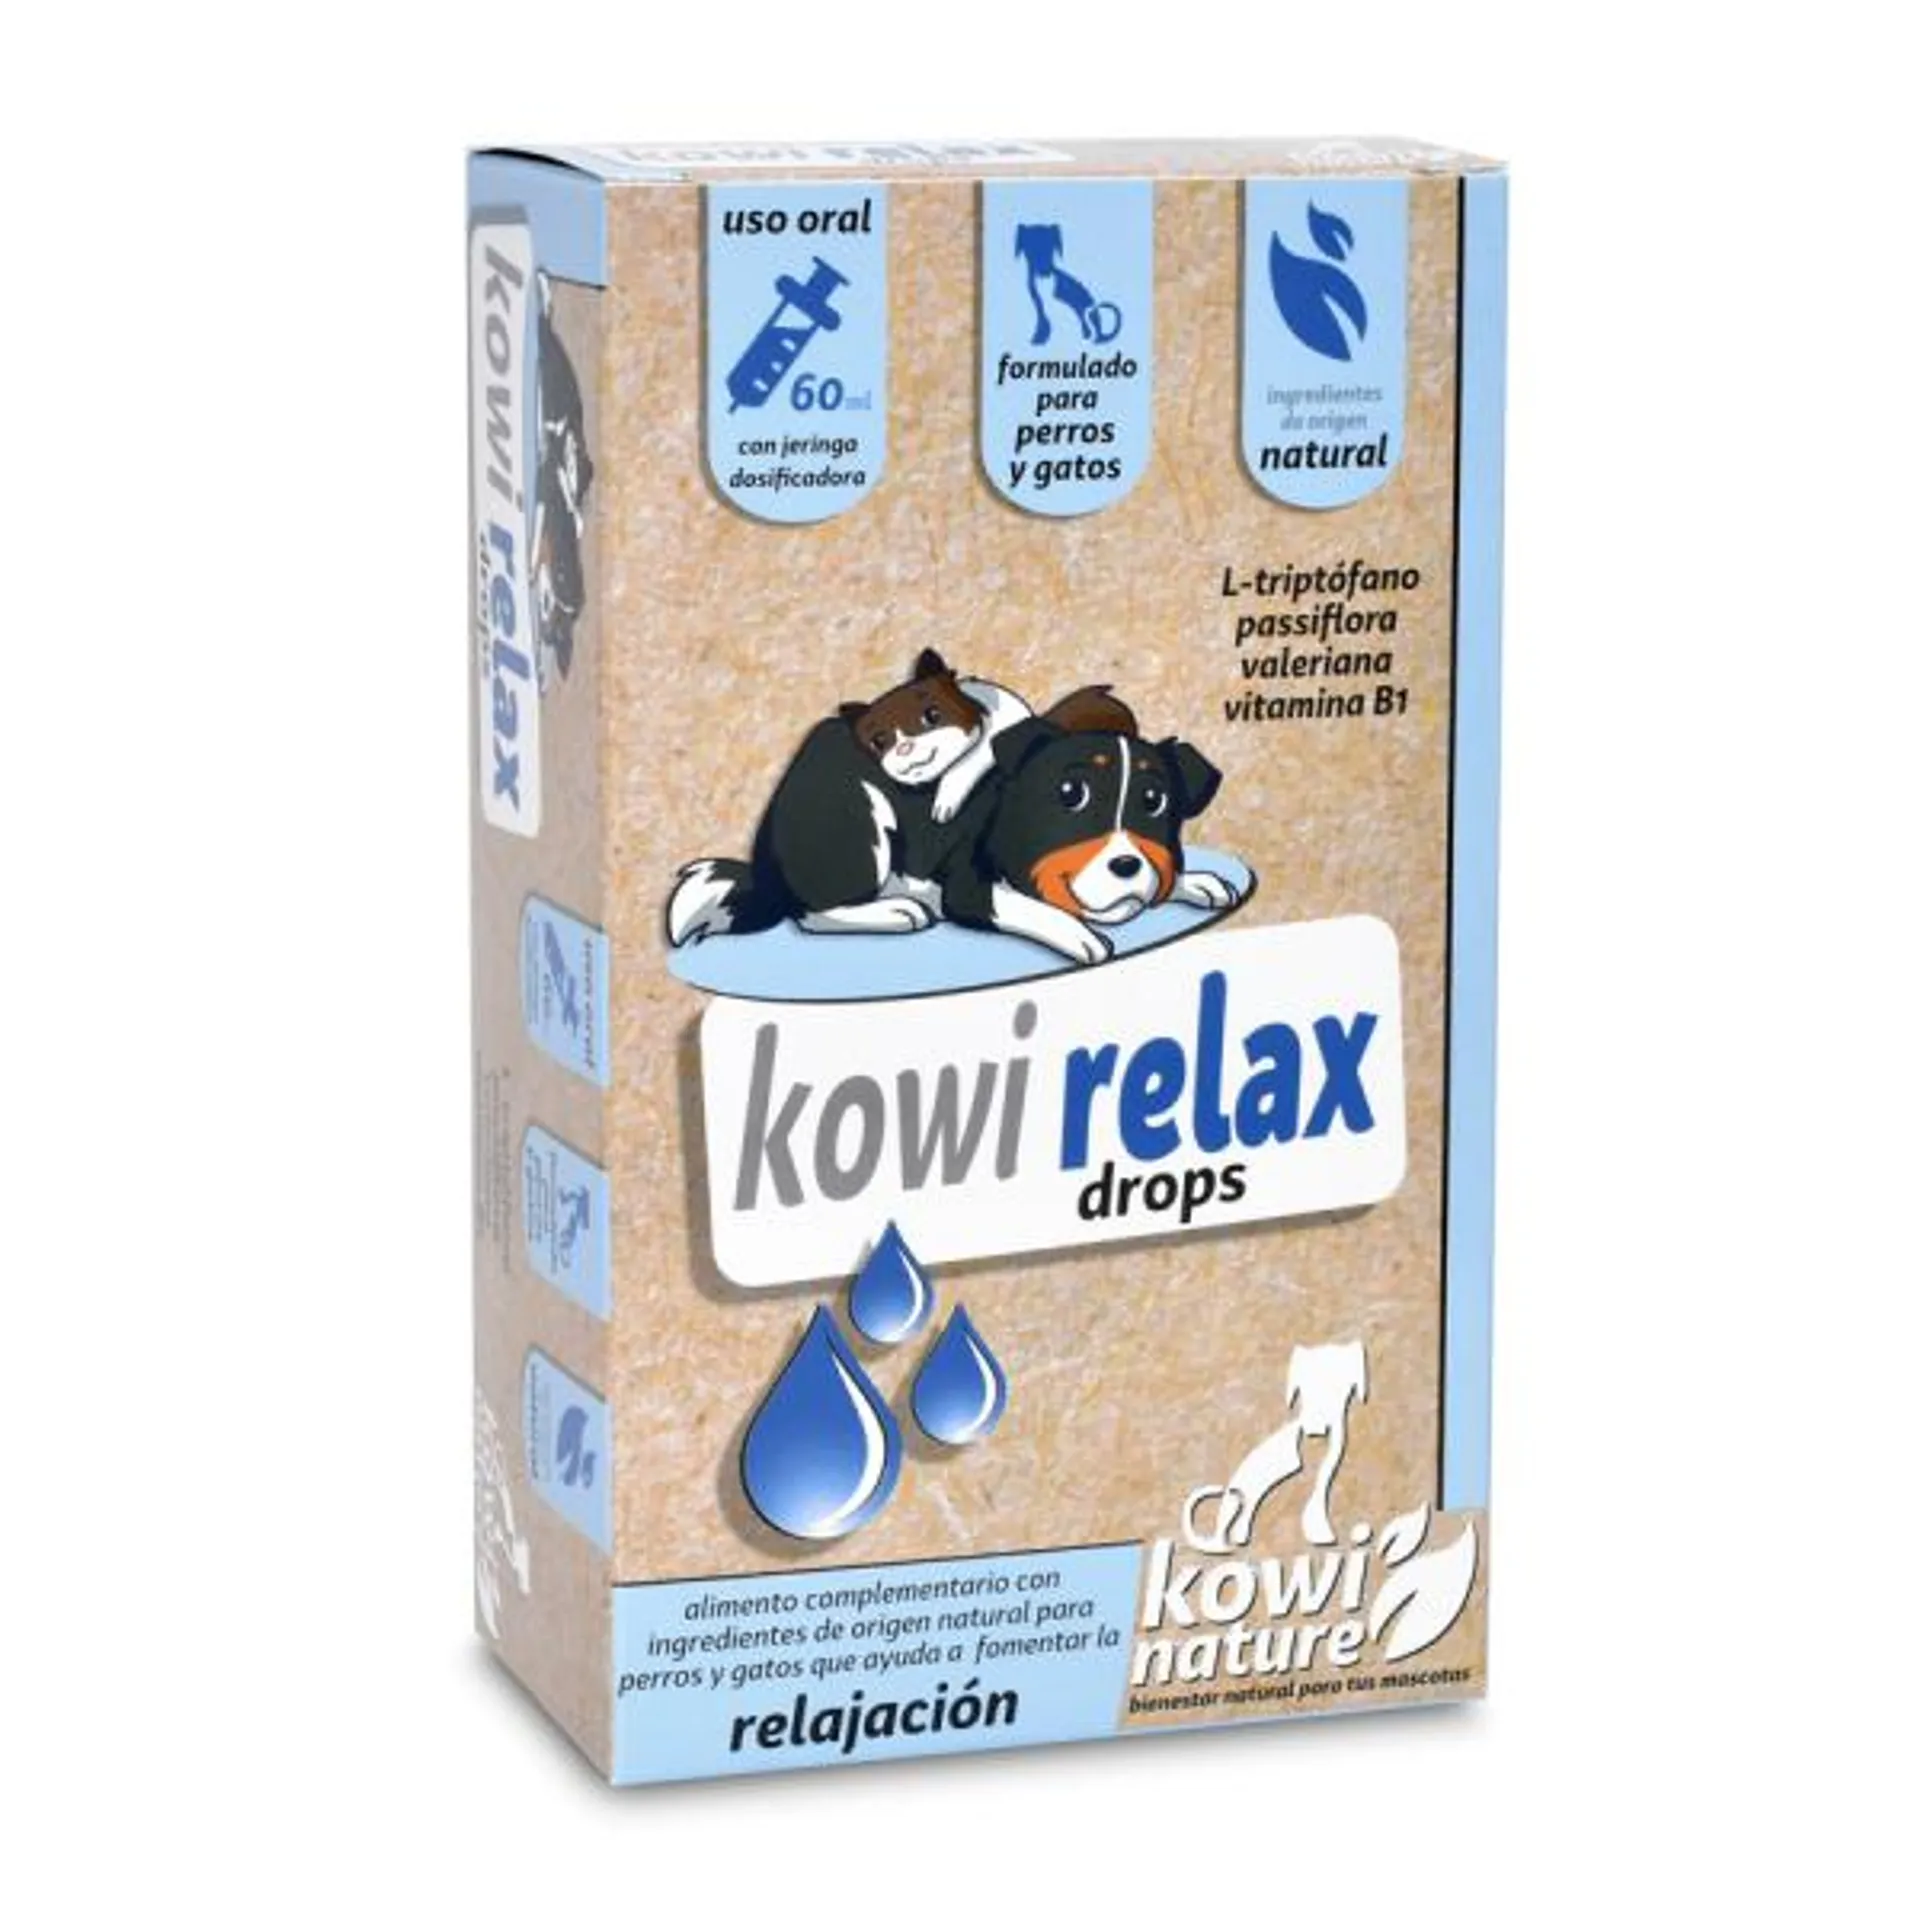 Kowi relax drops – Kowi Nature